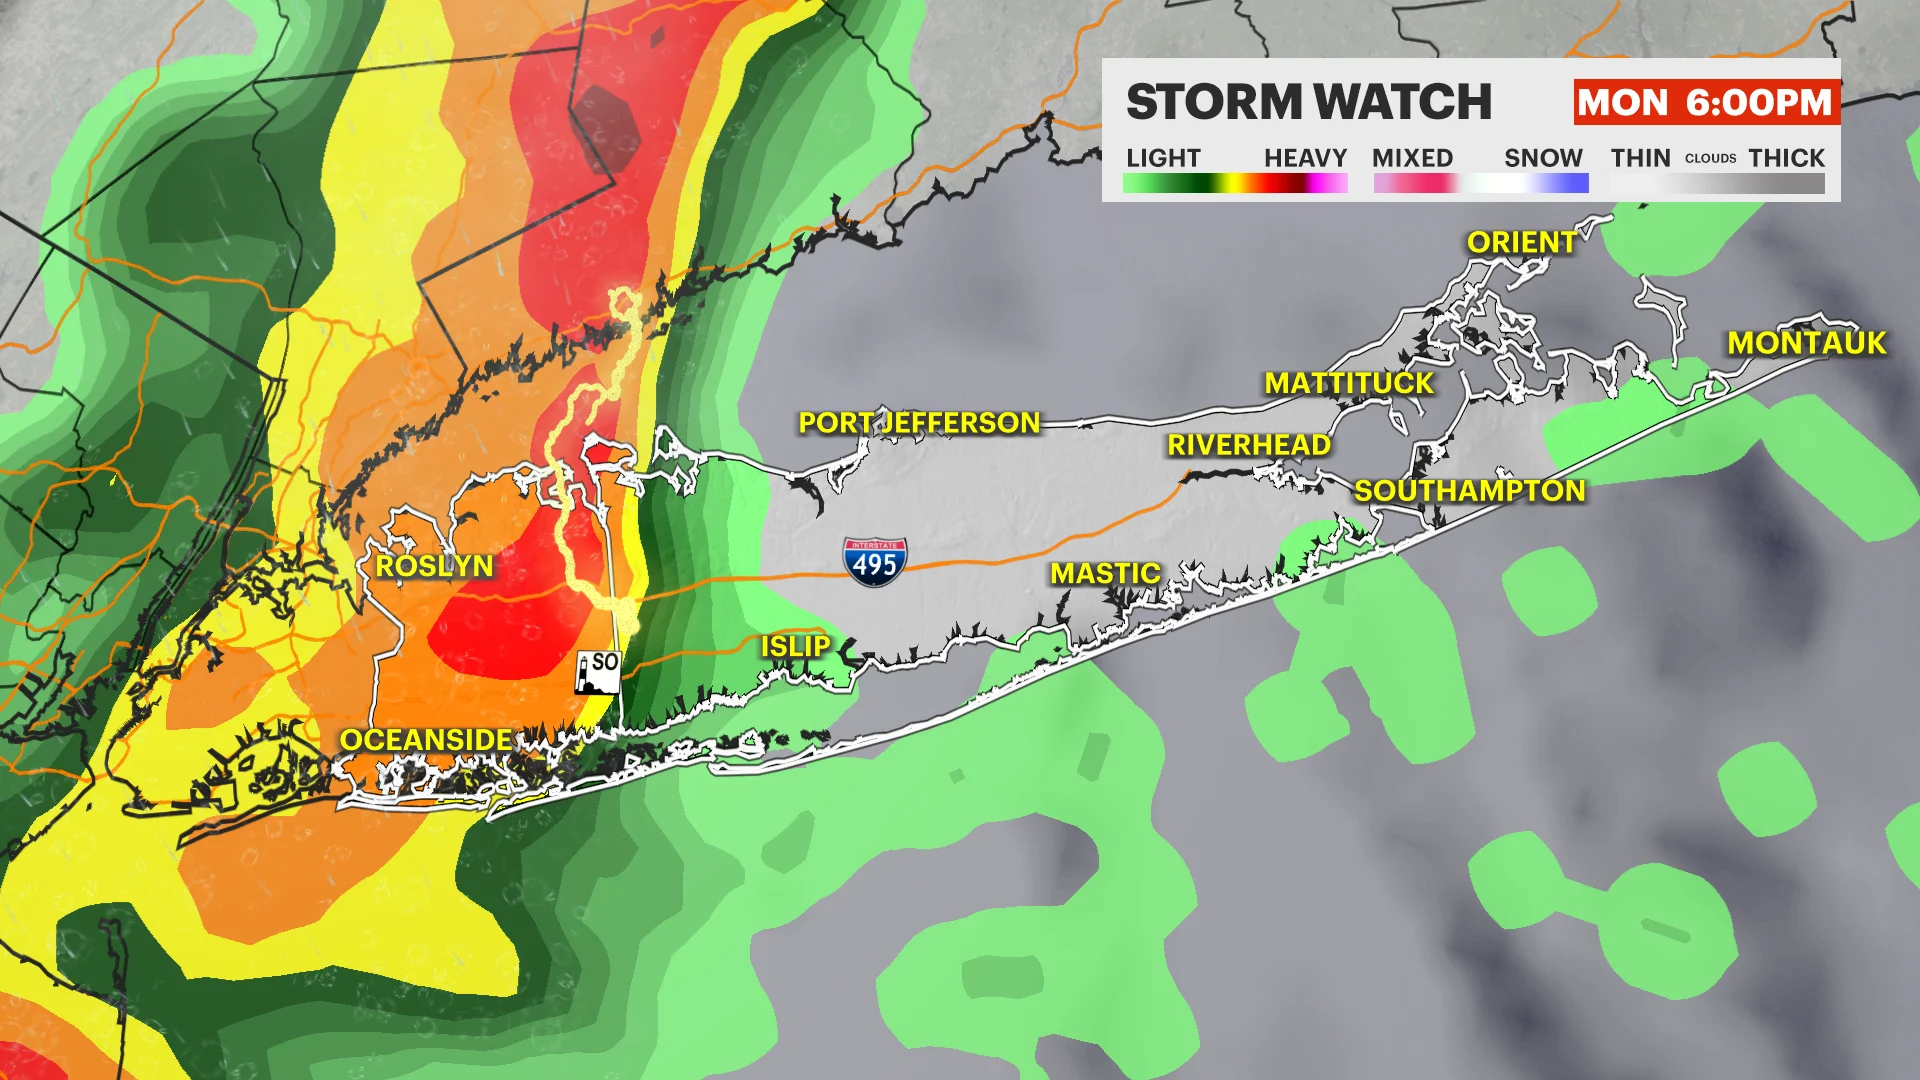 STORM WATCH: Threat of severe storms on Long Island for Memorial Day 